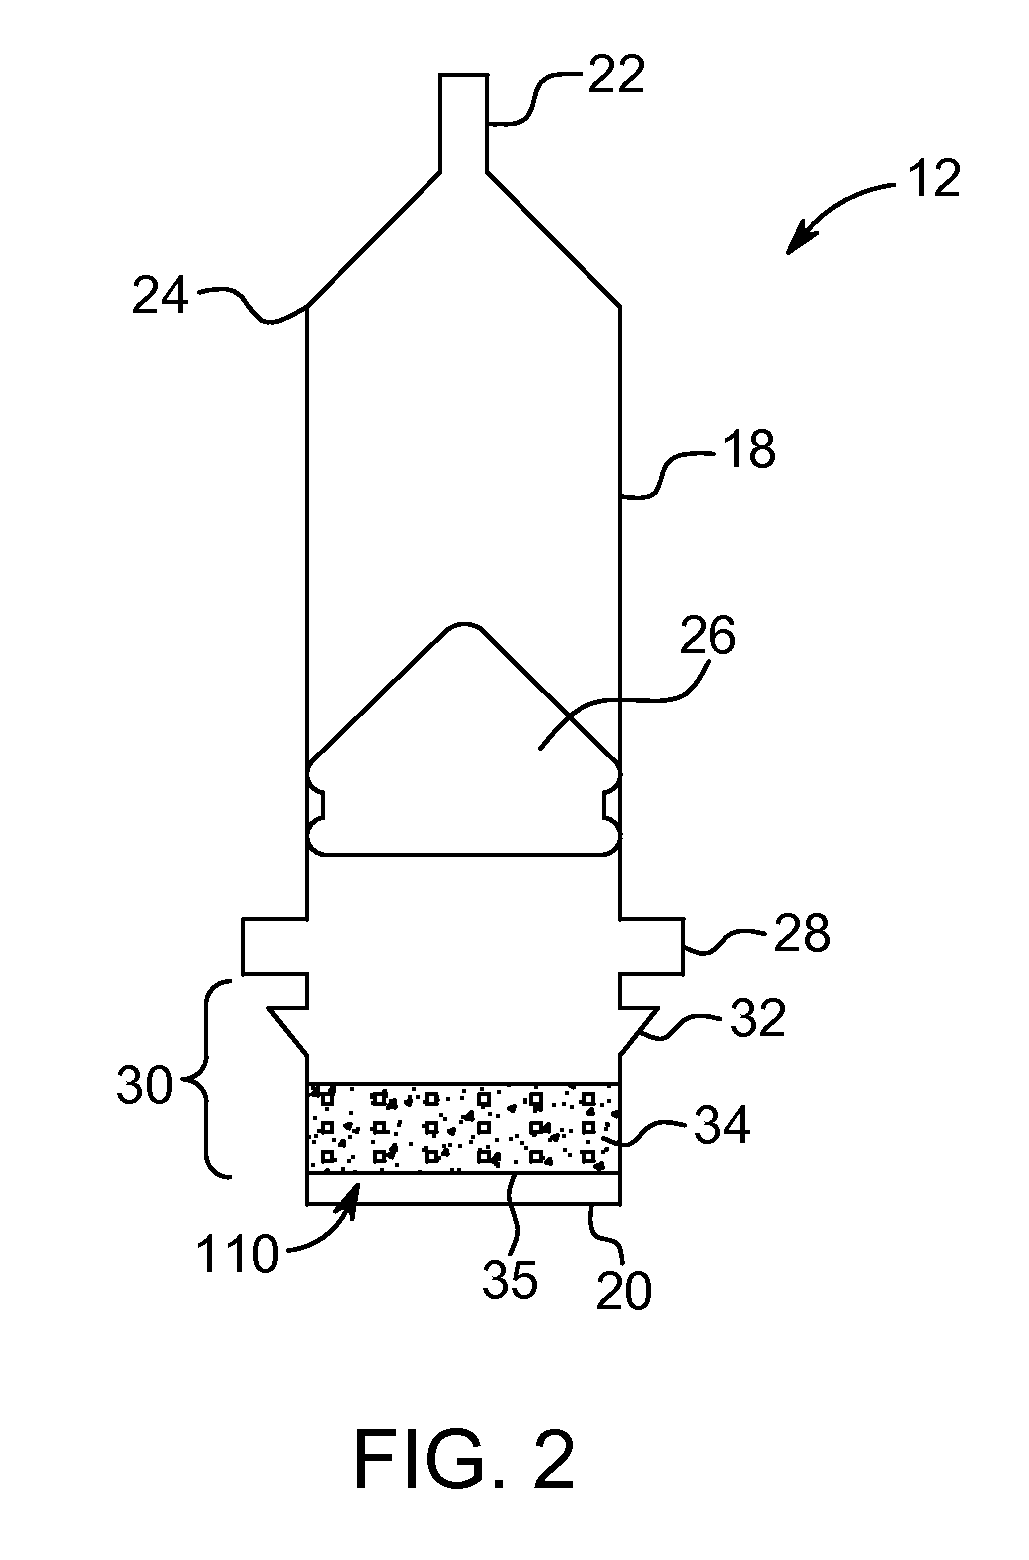 Syringe and fluid injection system with an orientation independent identification code